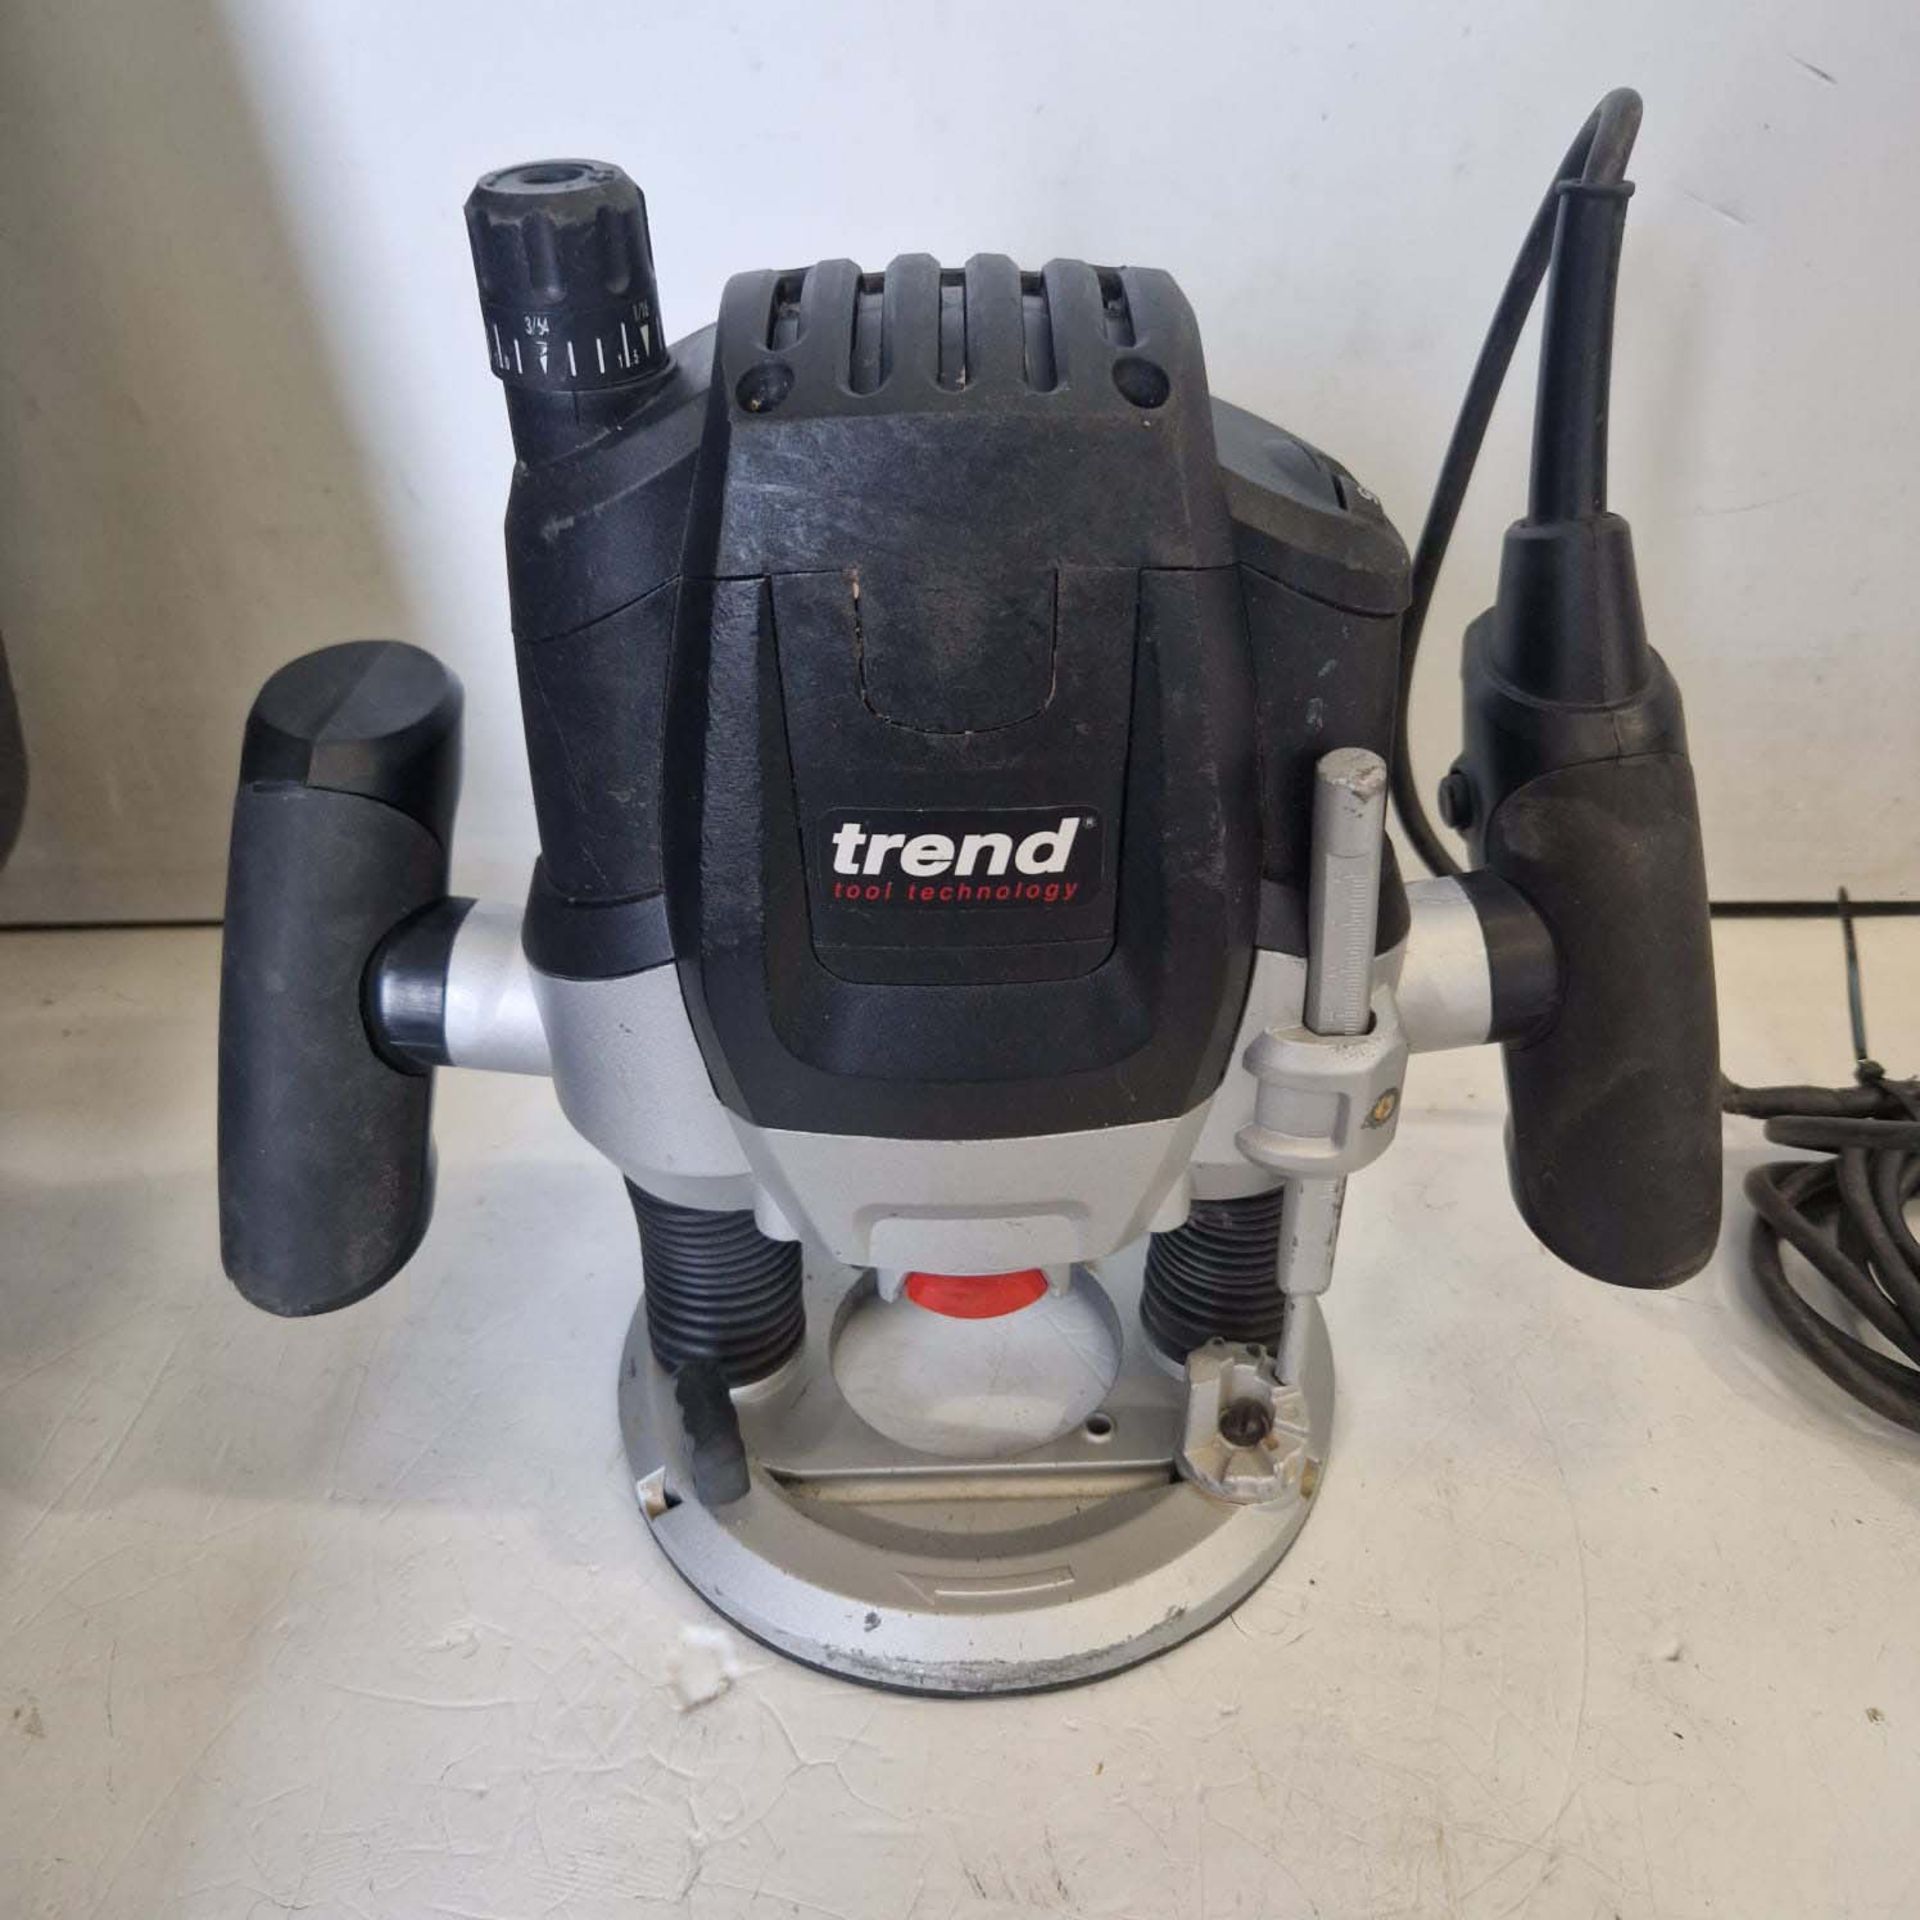 Trend Tool Technology Electric Router. With Accessories